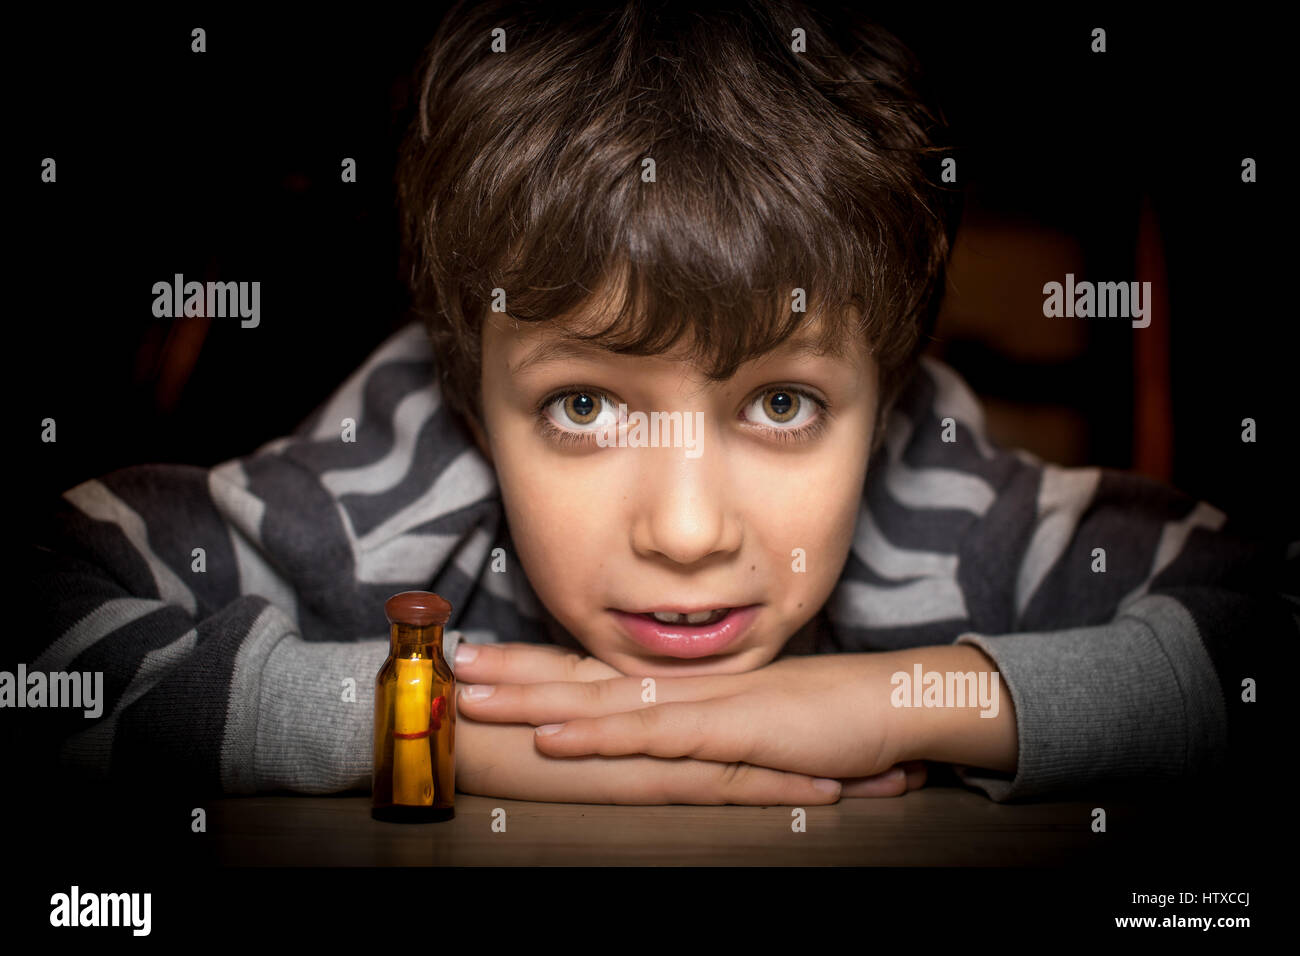 Boy trustful look and his message in a bottle, portrait. Stock Photo